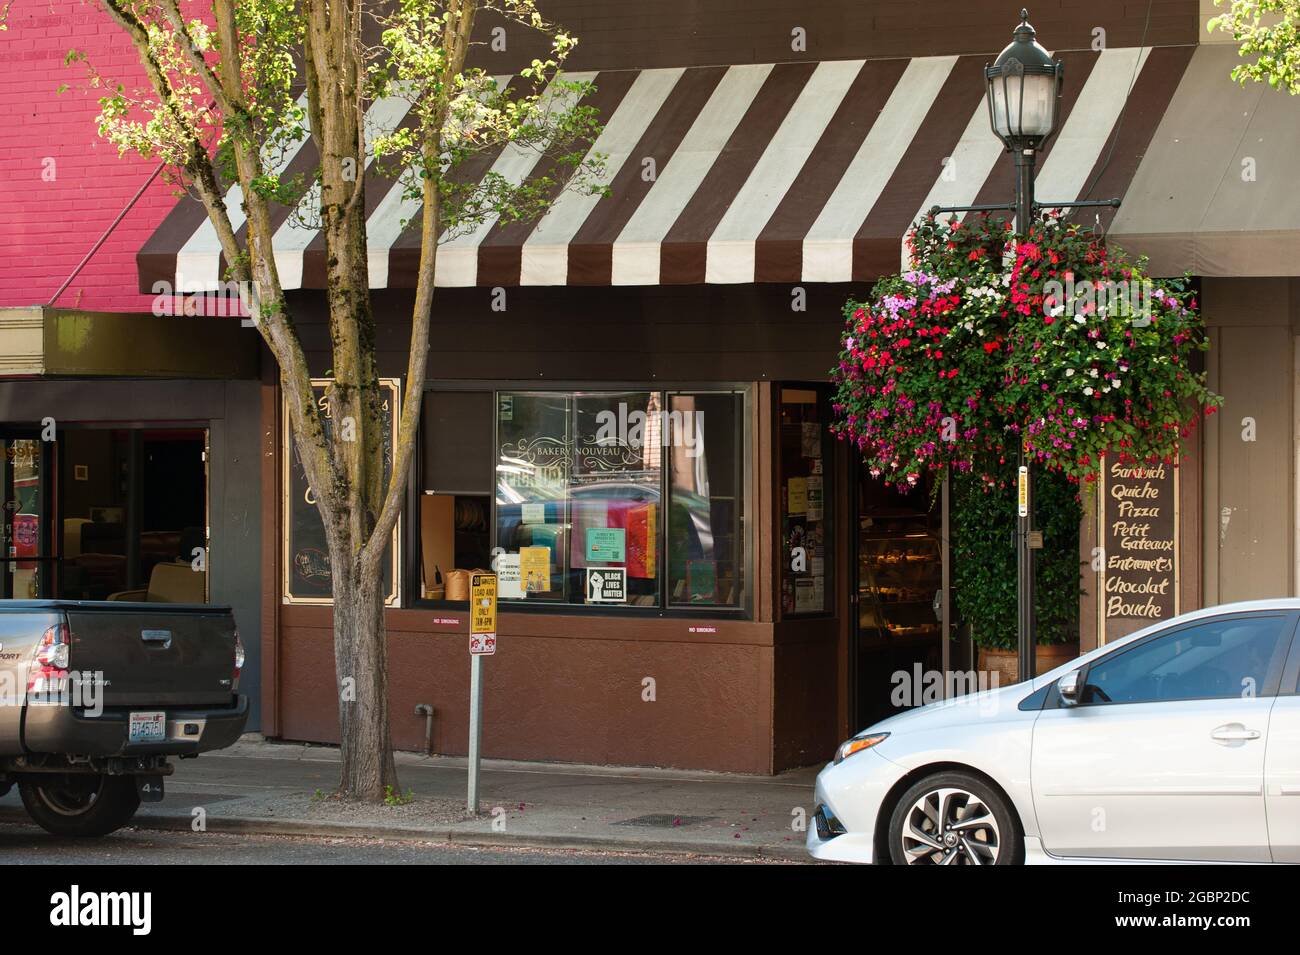 The West Seattle location of Bakery Nouveau in Seattle, WA. Stock Photo